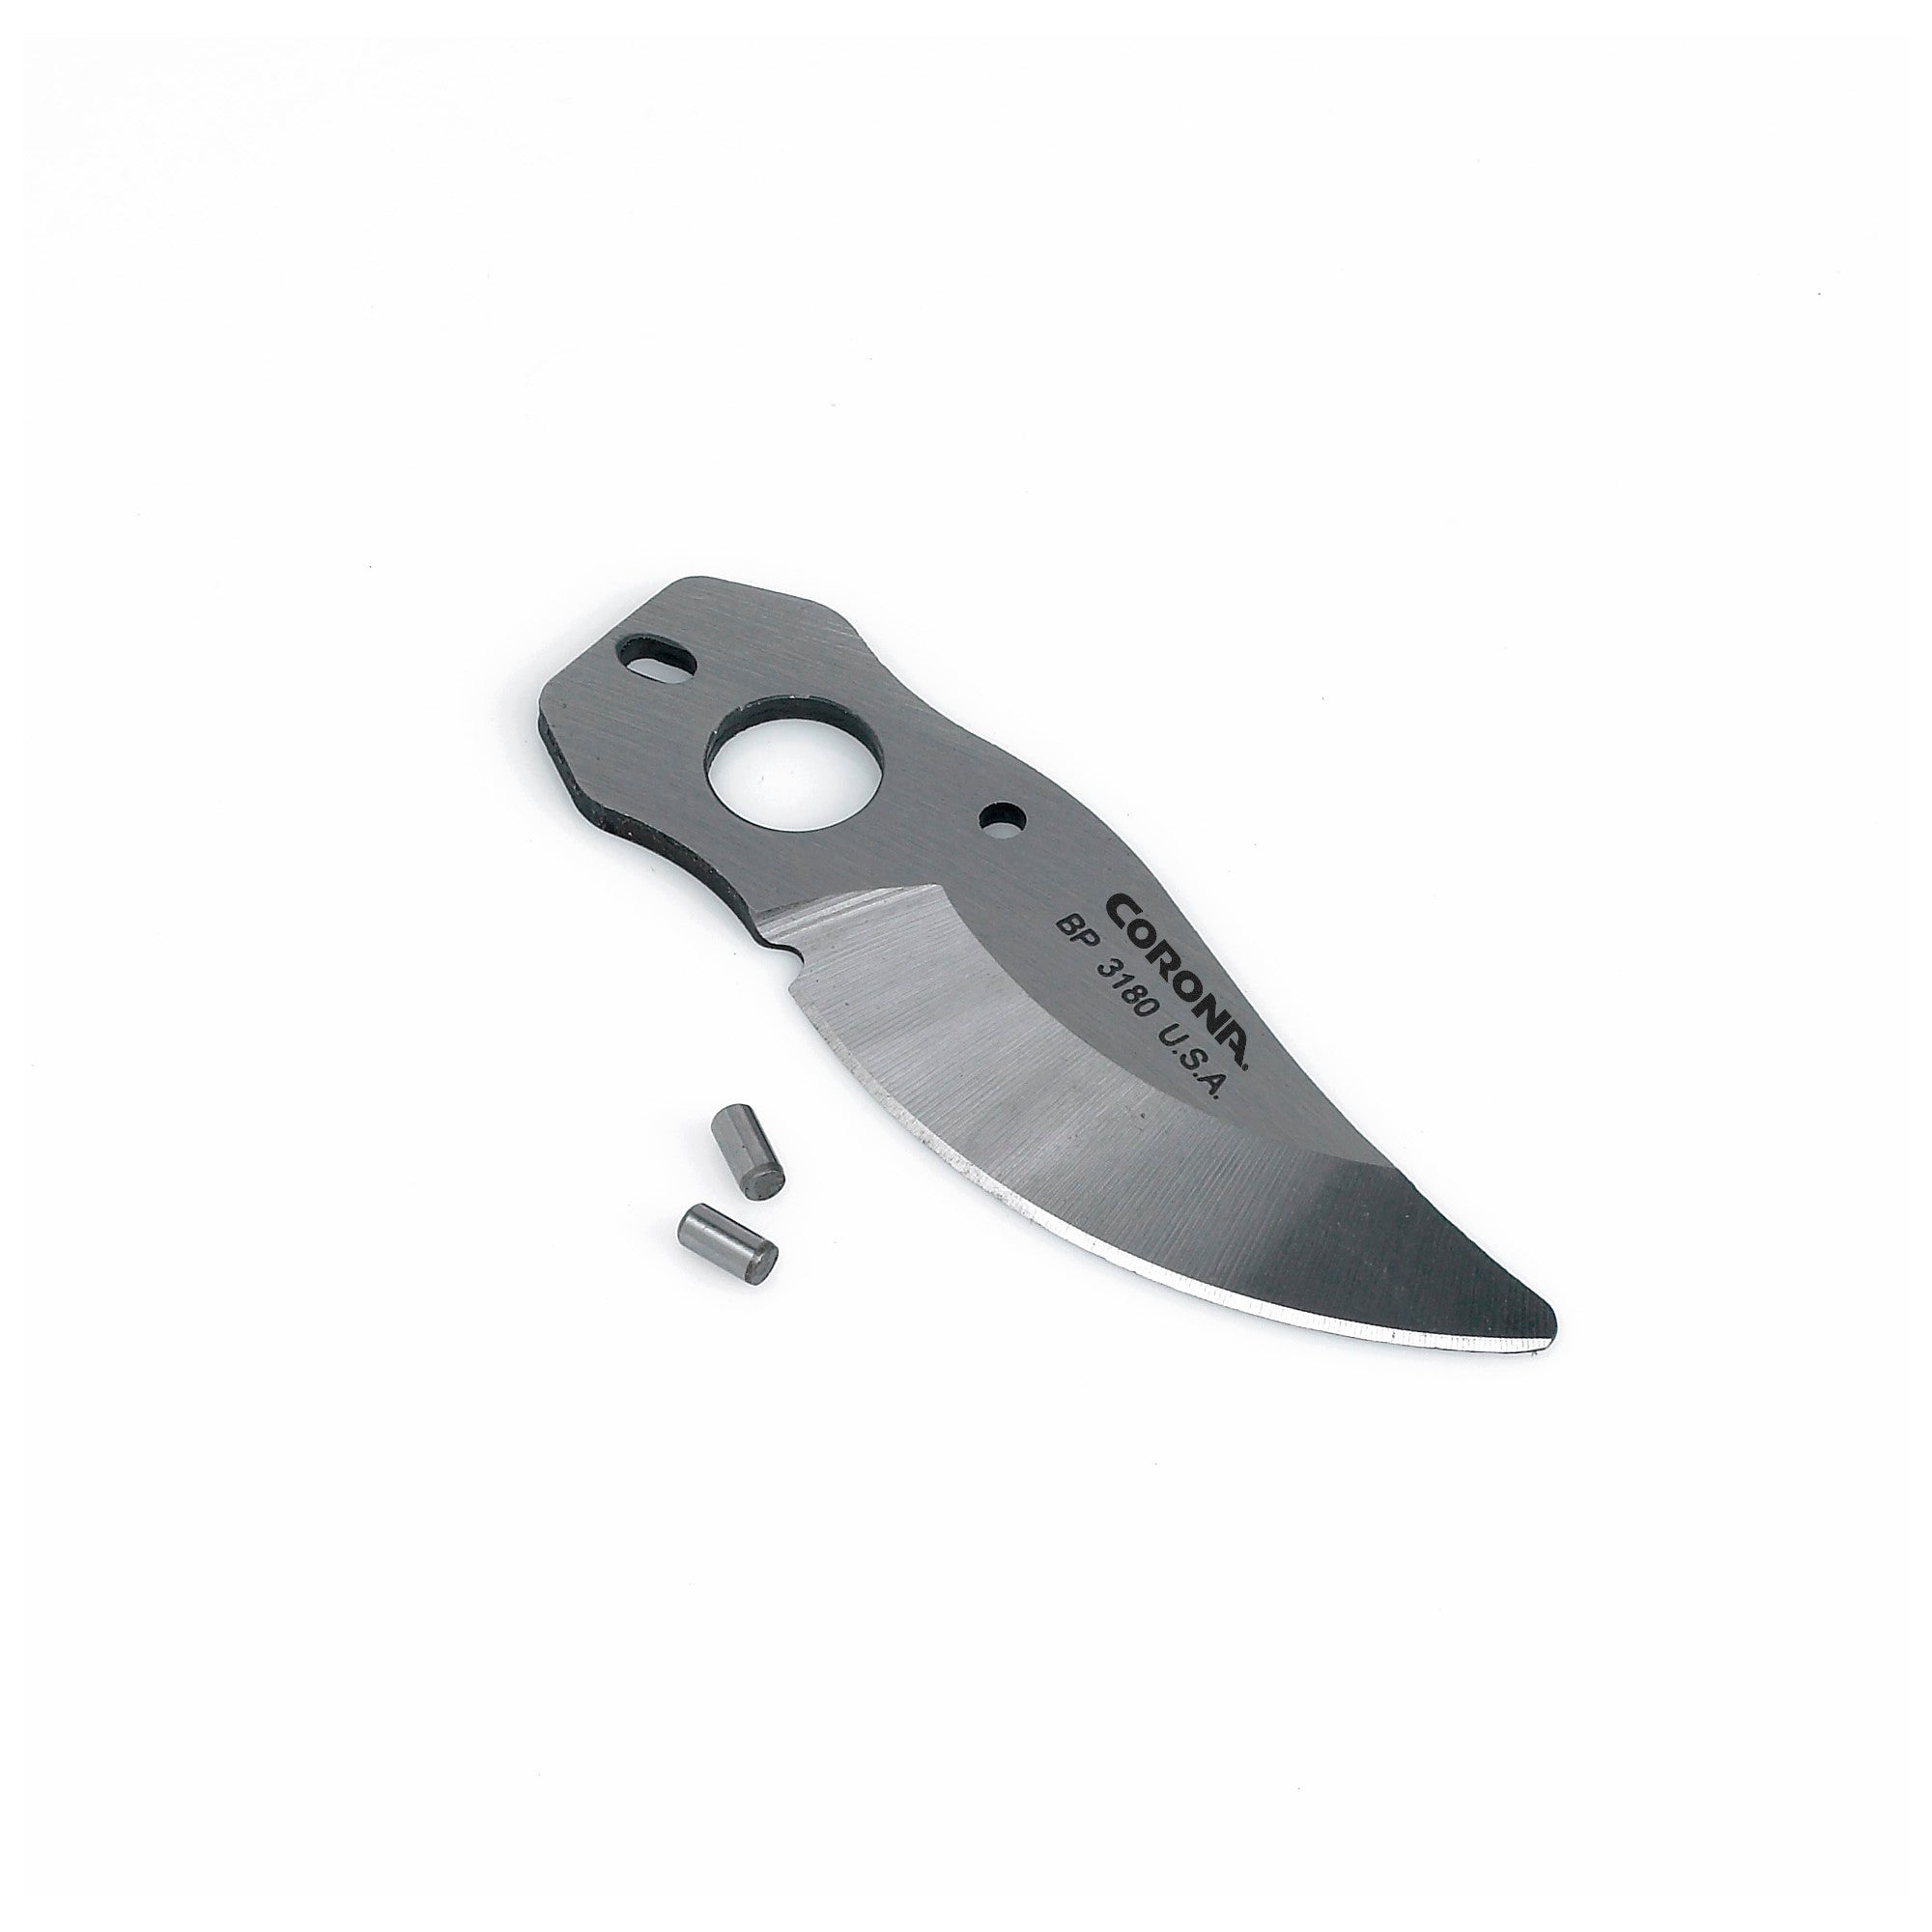 Replacement Blade for Bypass Pruners